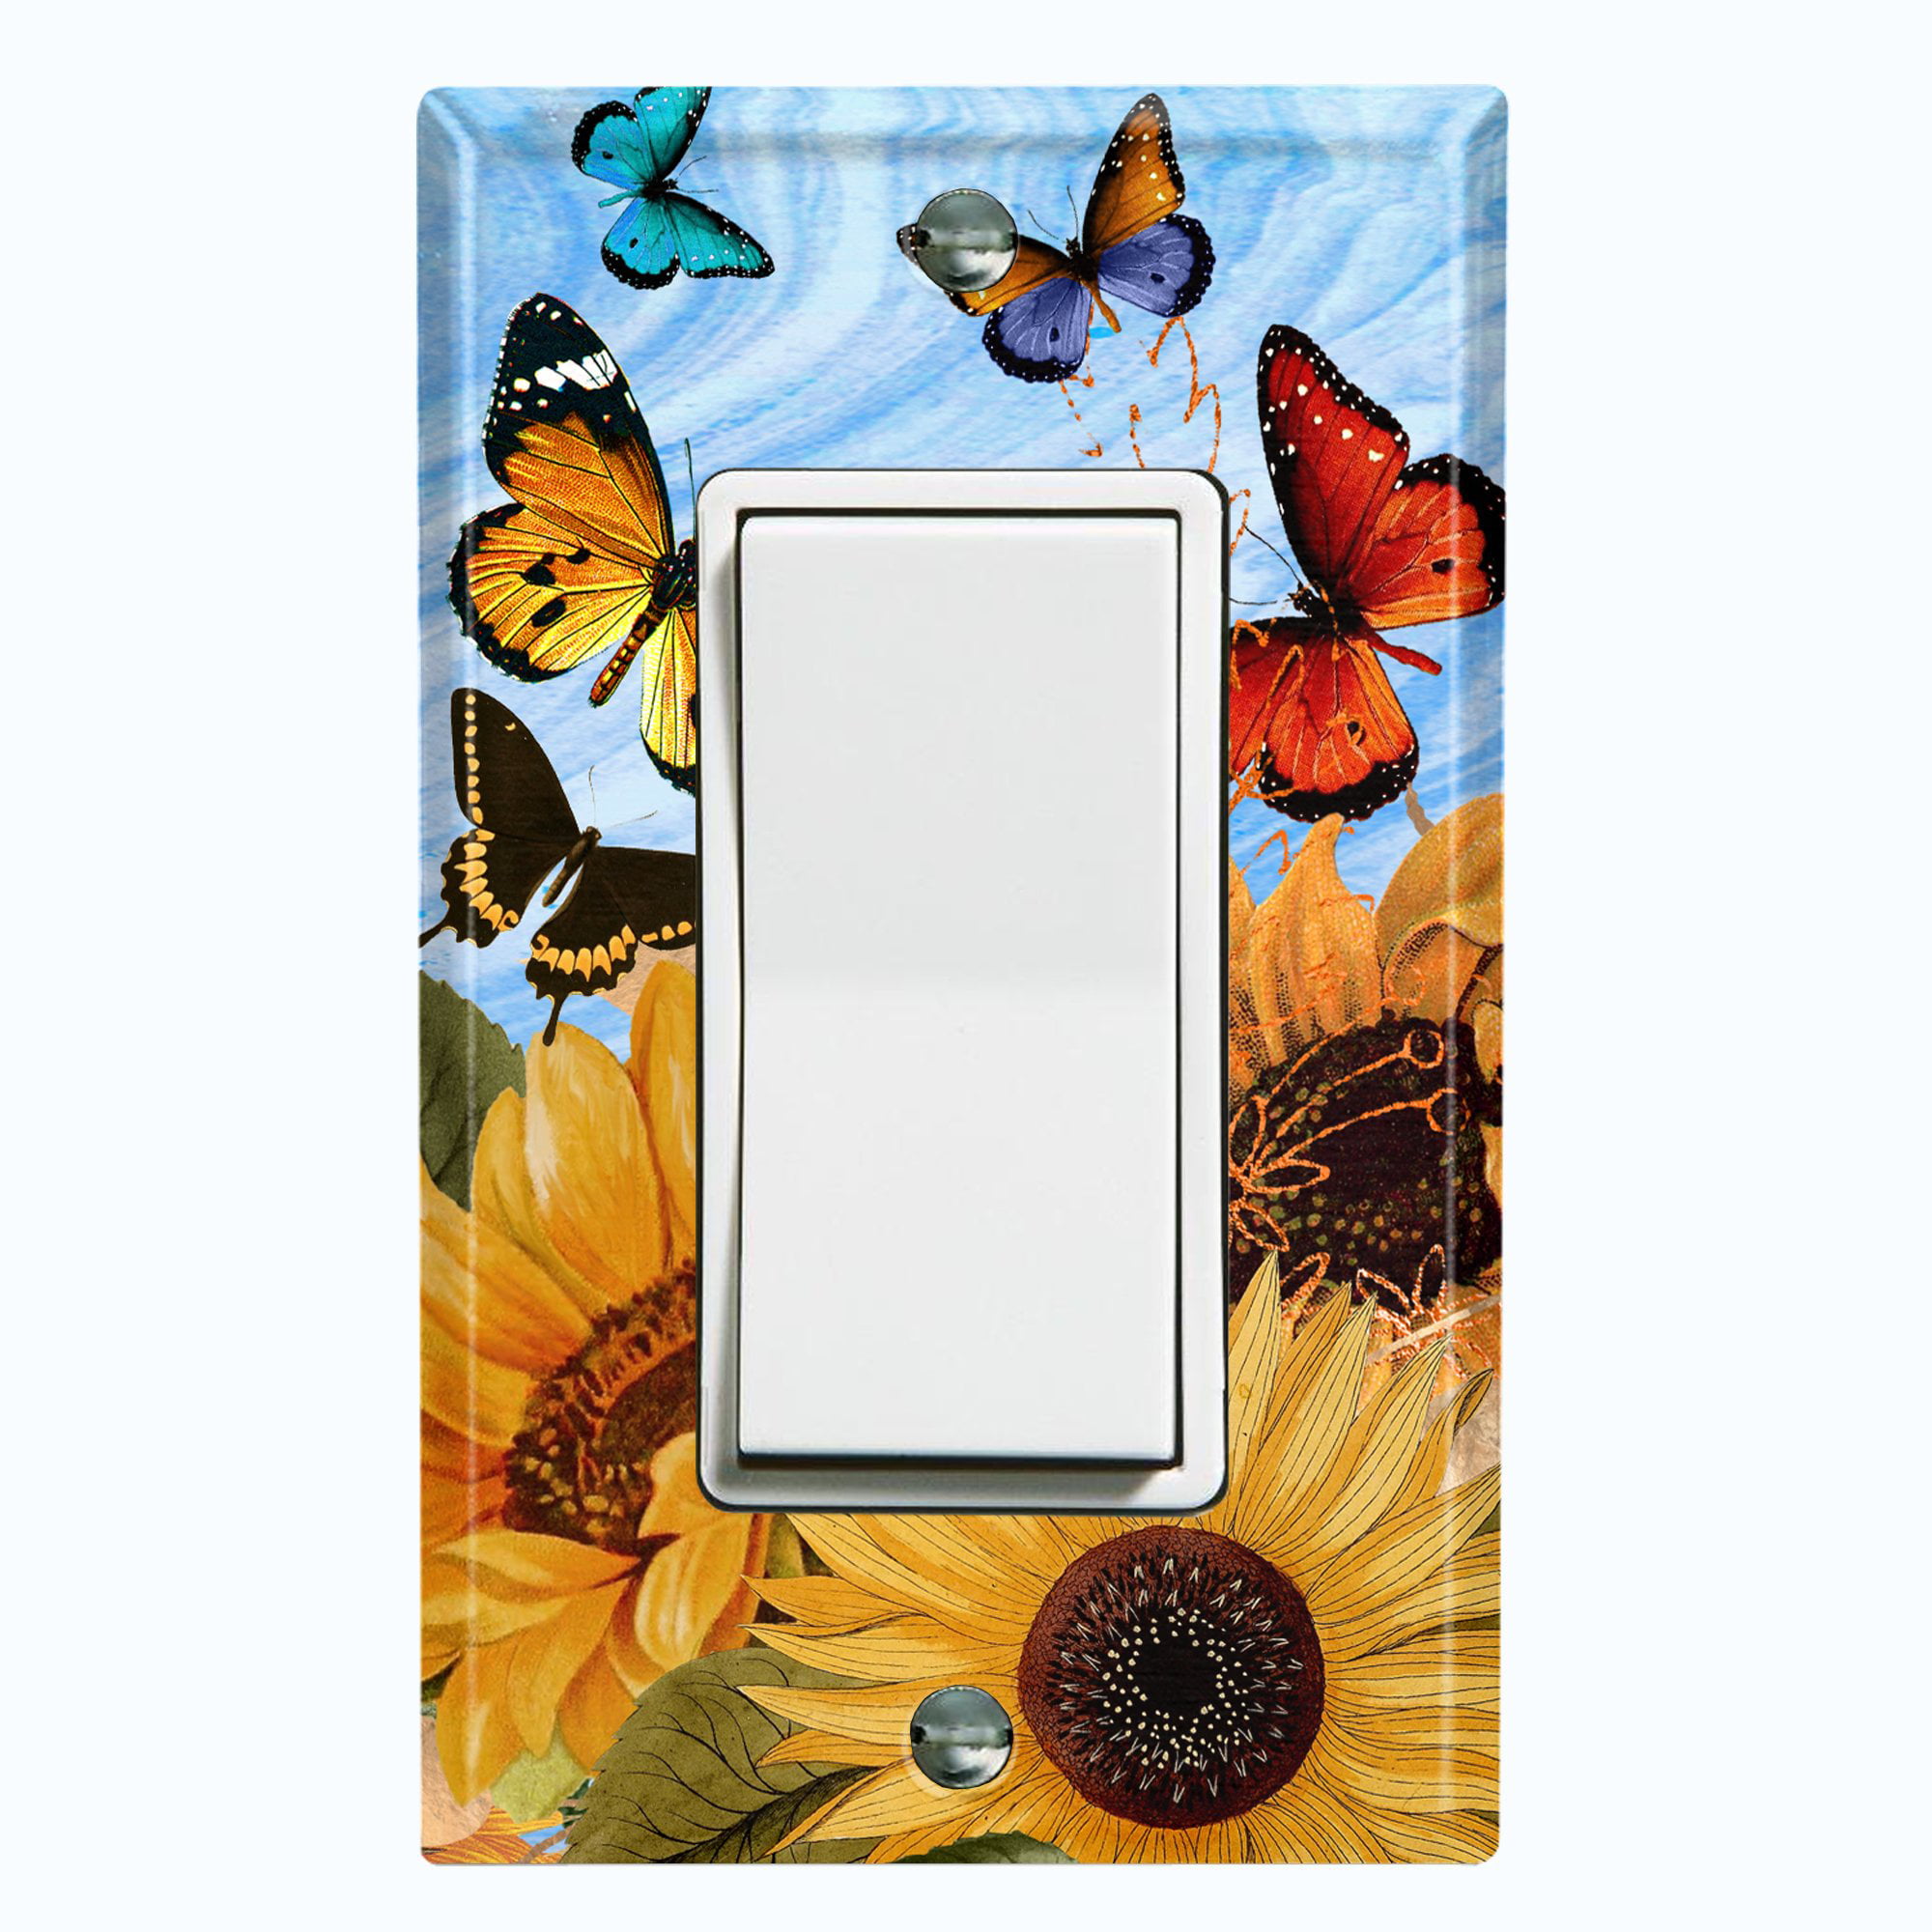 Blue Butterflies Decorative Single Toggle Light Switch Plate Cover